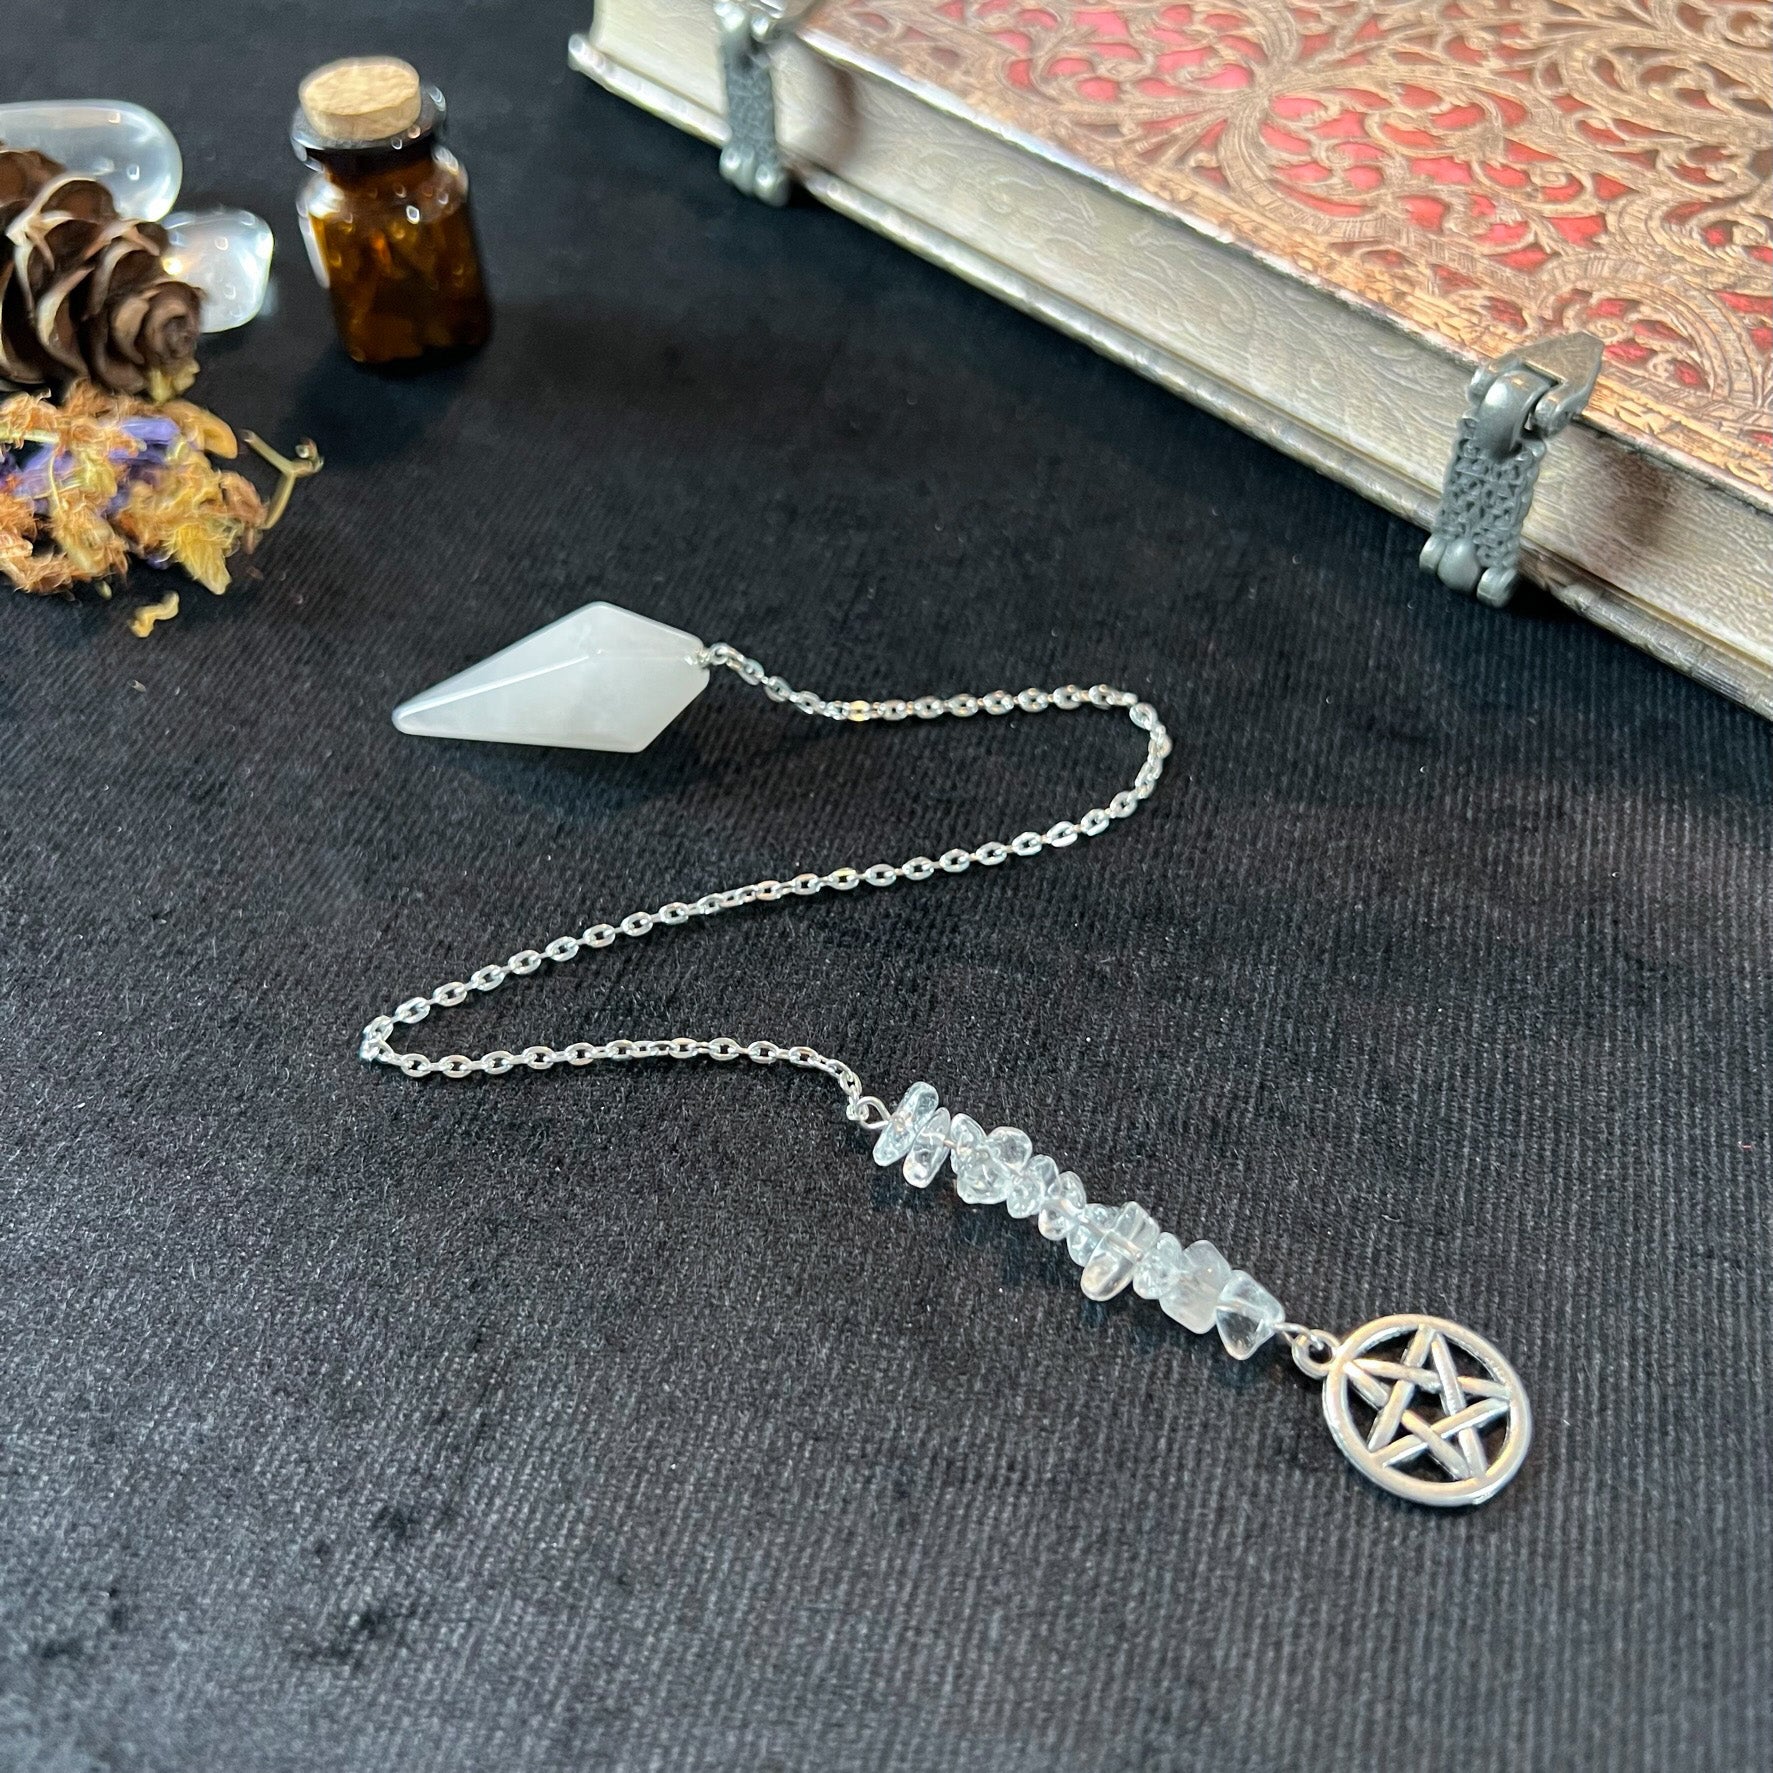 Clear quartz and pagan wiccan pentacle pendulum - The French Witch shop